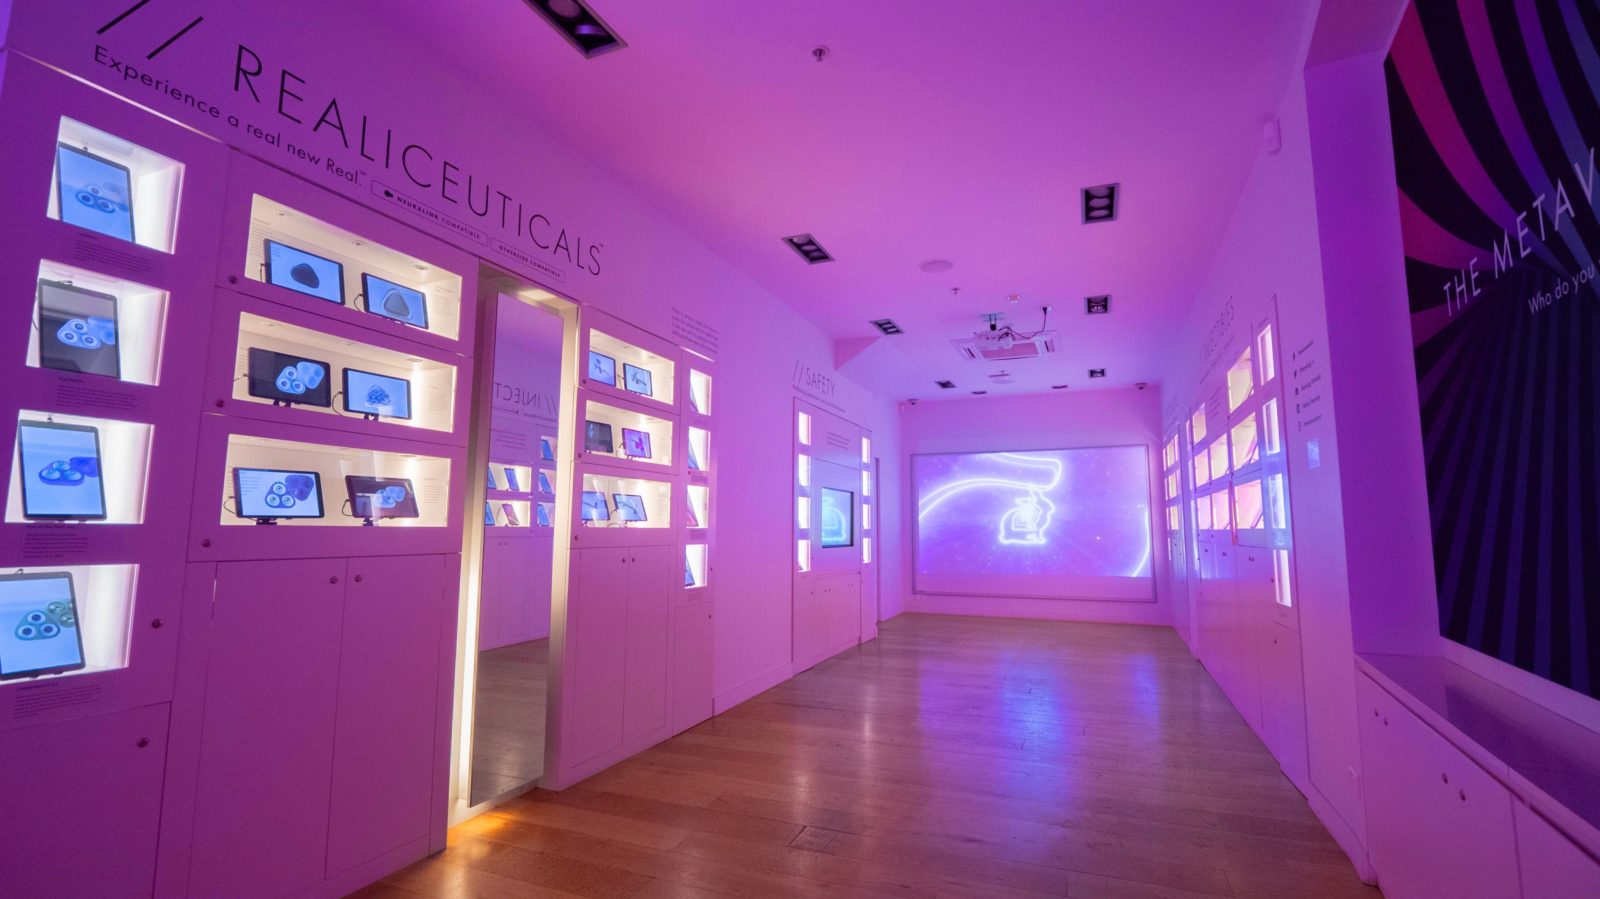 A view of The Meteaverse Store, lit up by purple LED lights and a selection of futuristic art